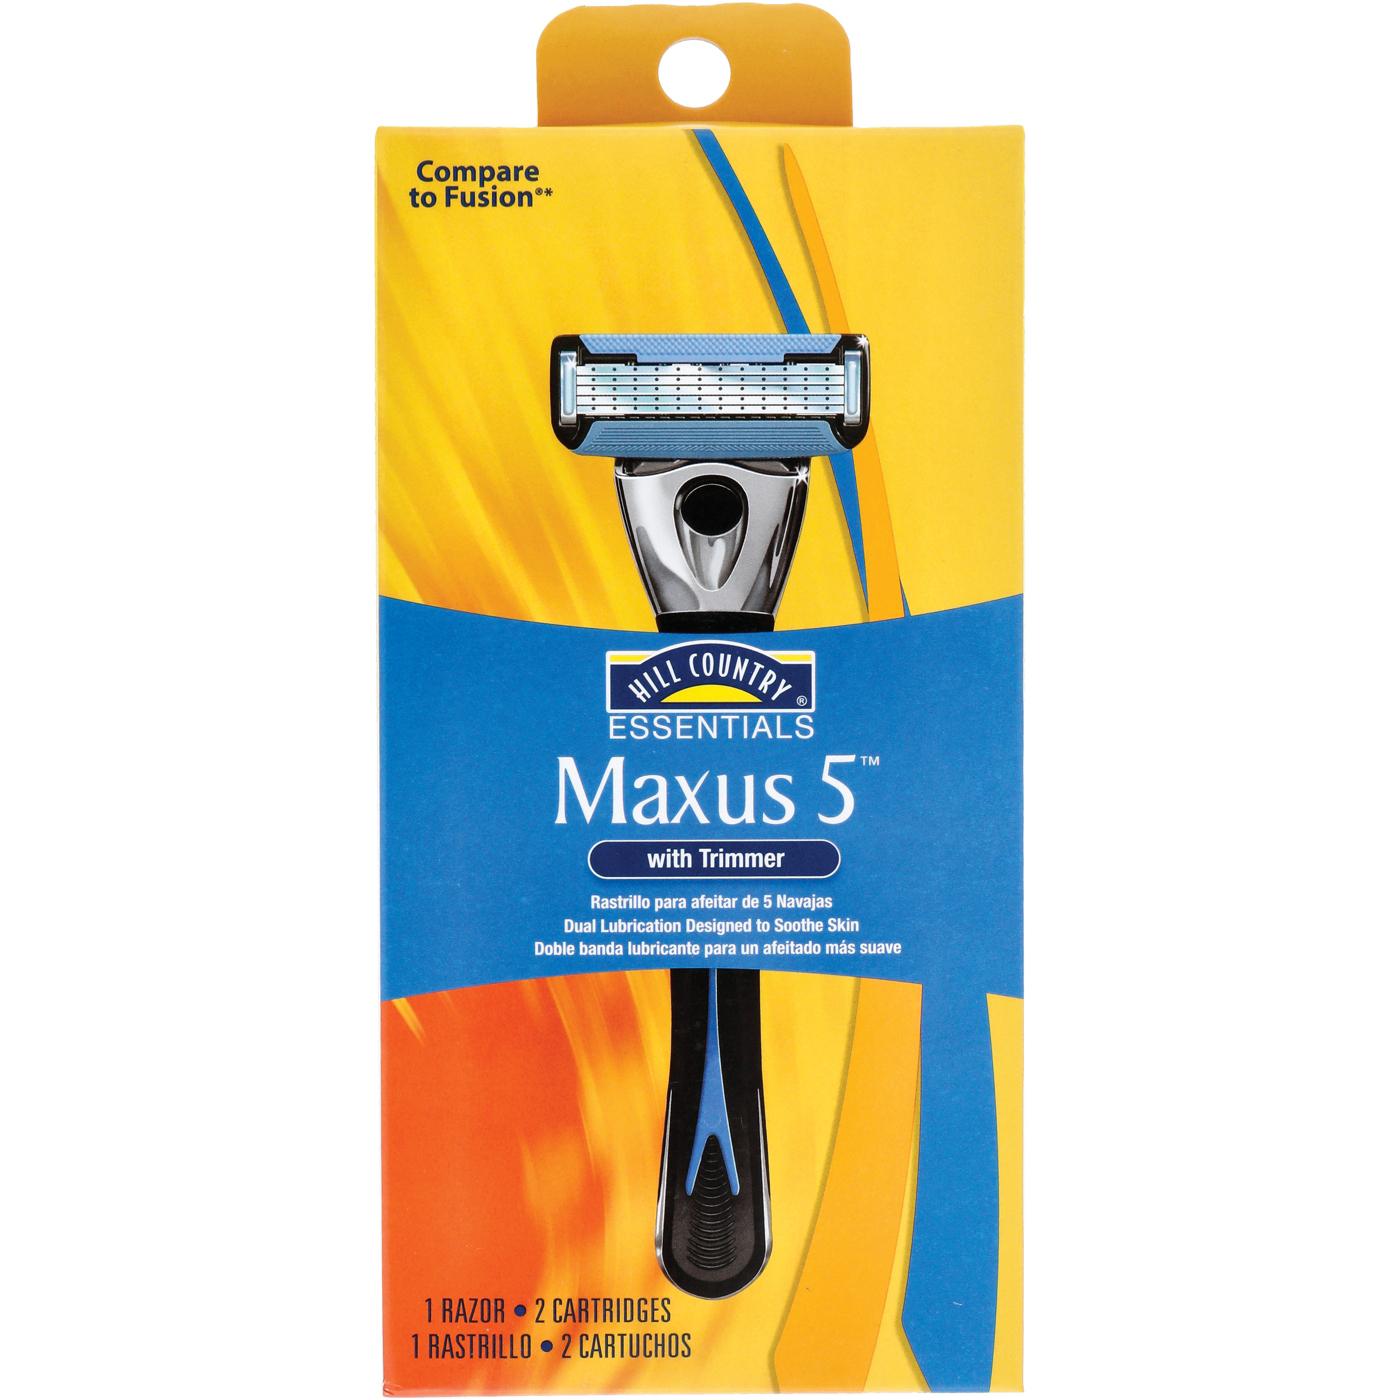 Hill Country Essentials Maxus5 Men's Razor with 2 refills; image 1 of 5